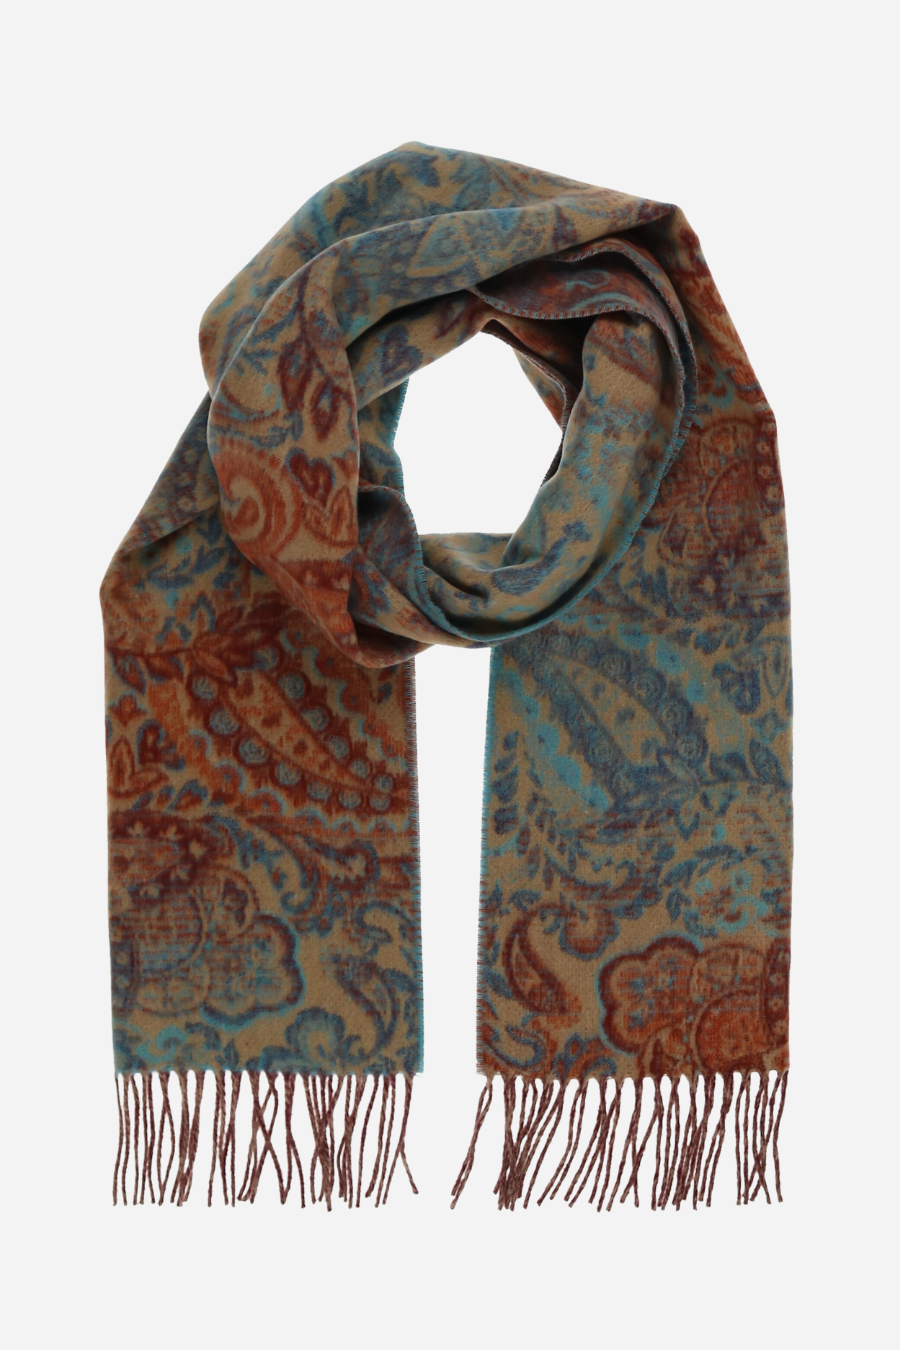 Geo flower scarf, Fraas, Women's Winter Scarves and Shawls online